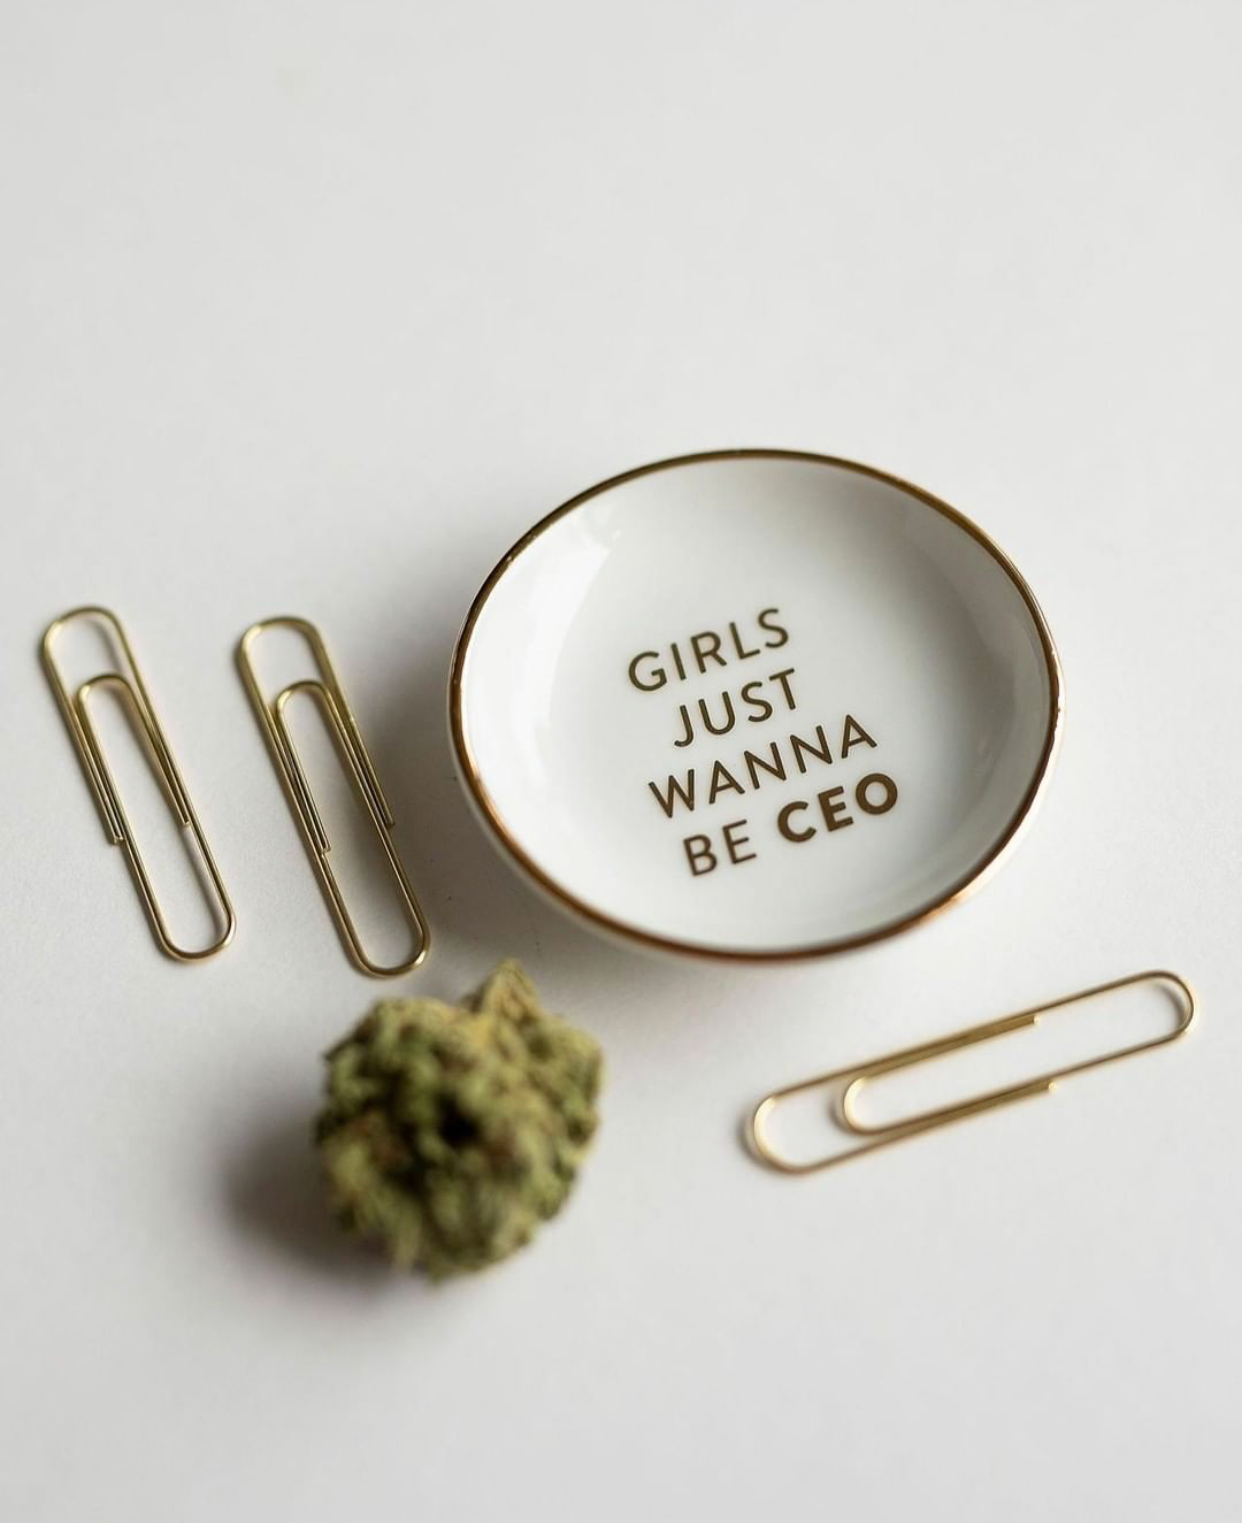 Ladies, we are changing the face of cannabis